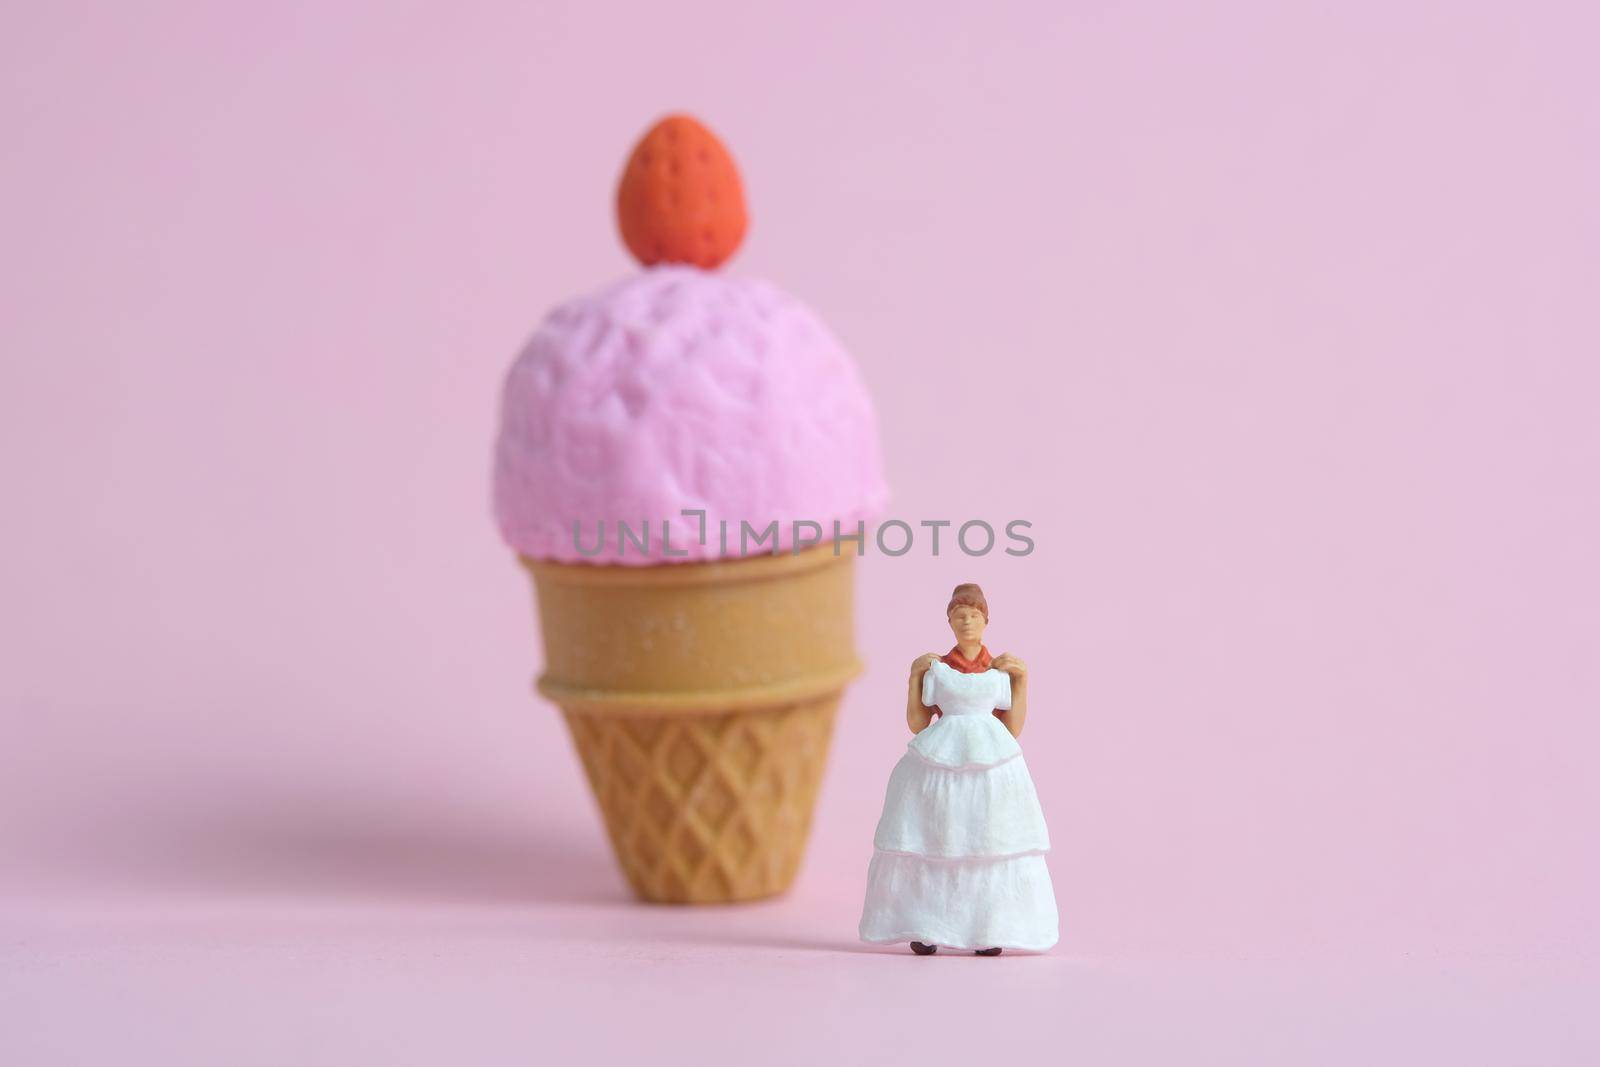 Woman dieting from ice cream and fat before wedding day concept. Miniature people toys photography, girl holding wedding dress. Image photo